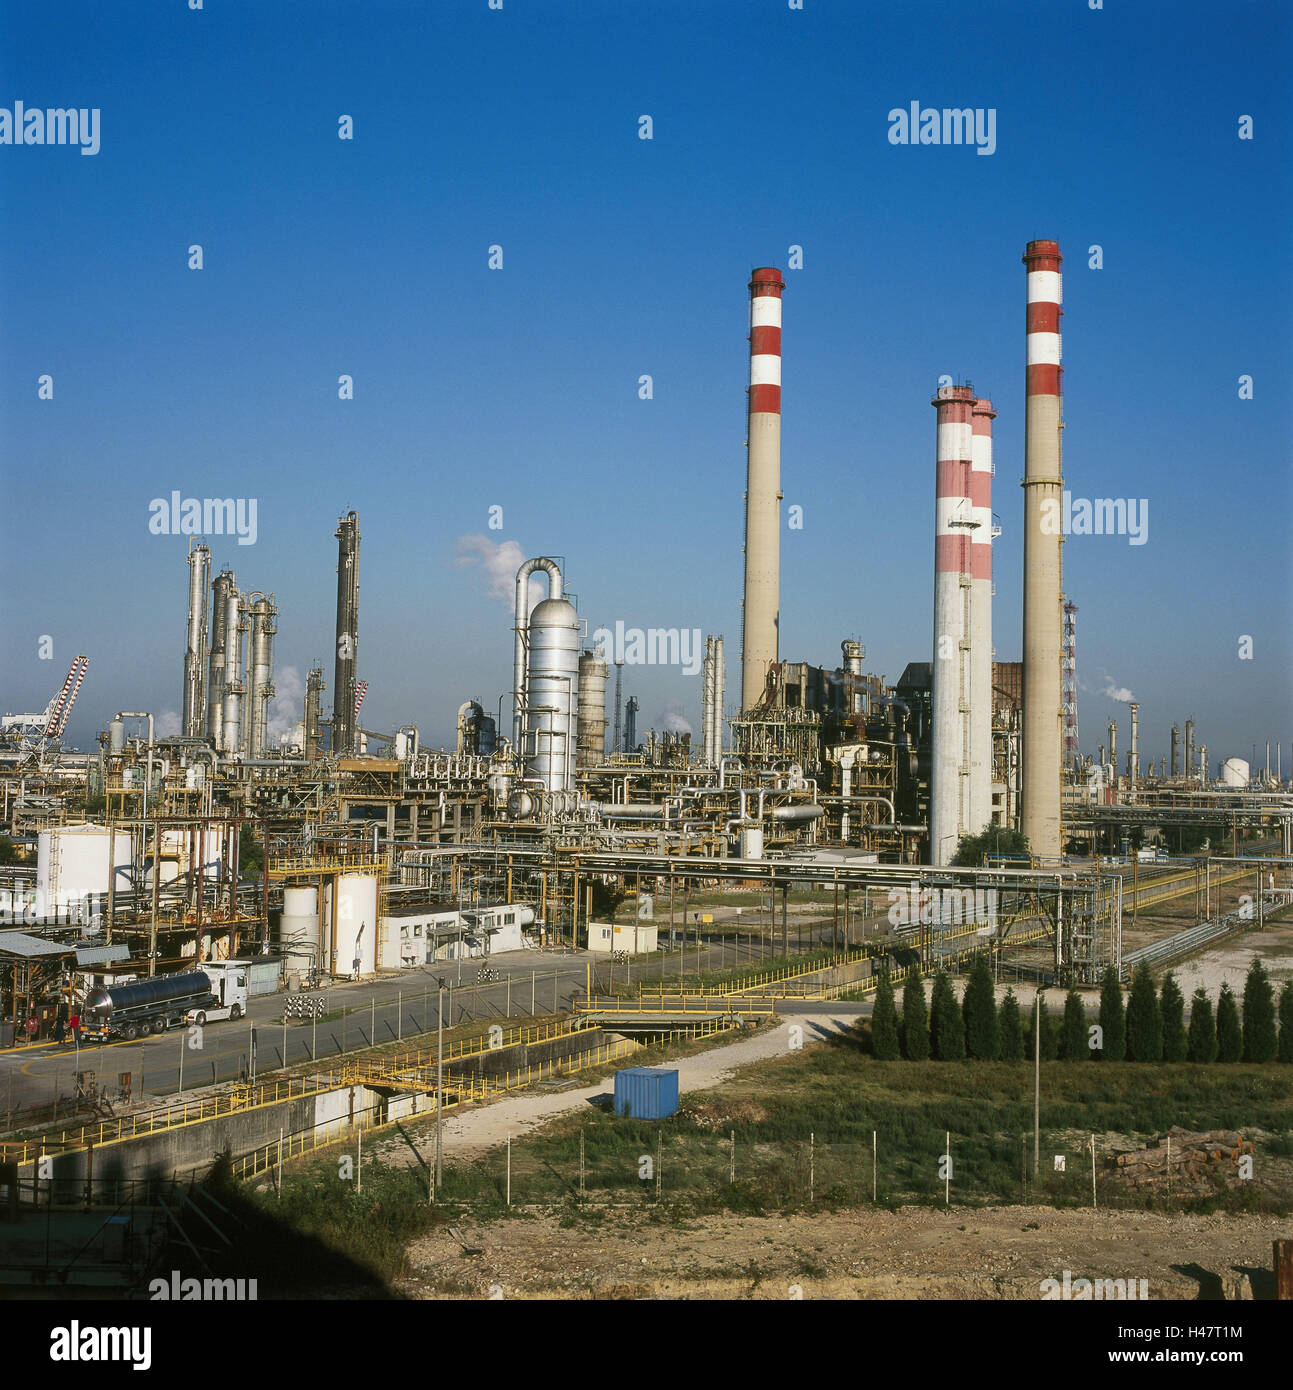 Large Scale Industry Photos - Colaboratory